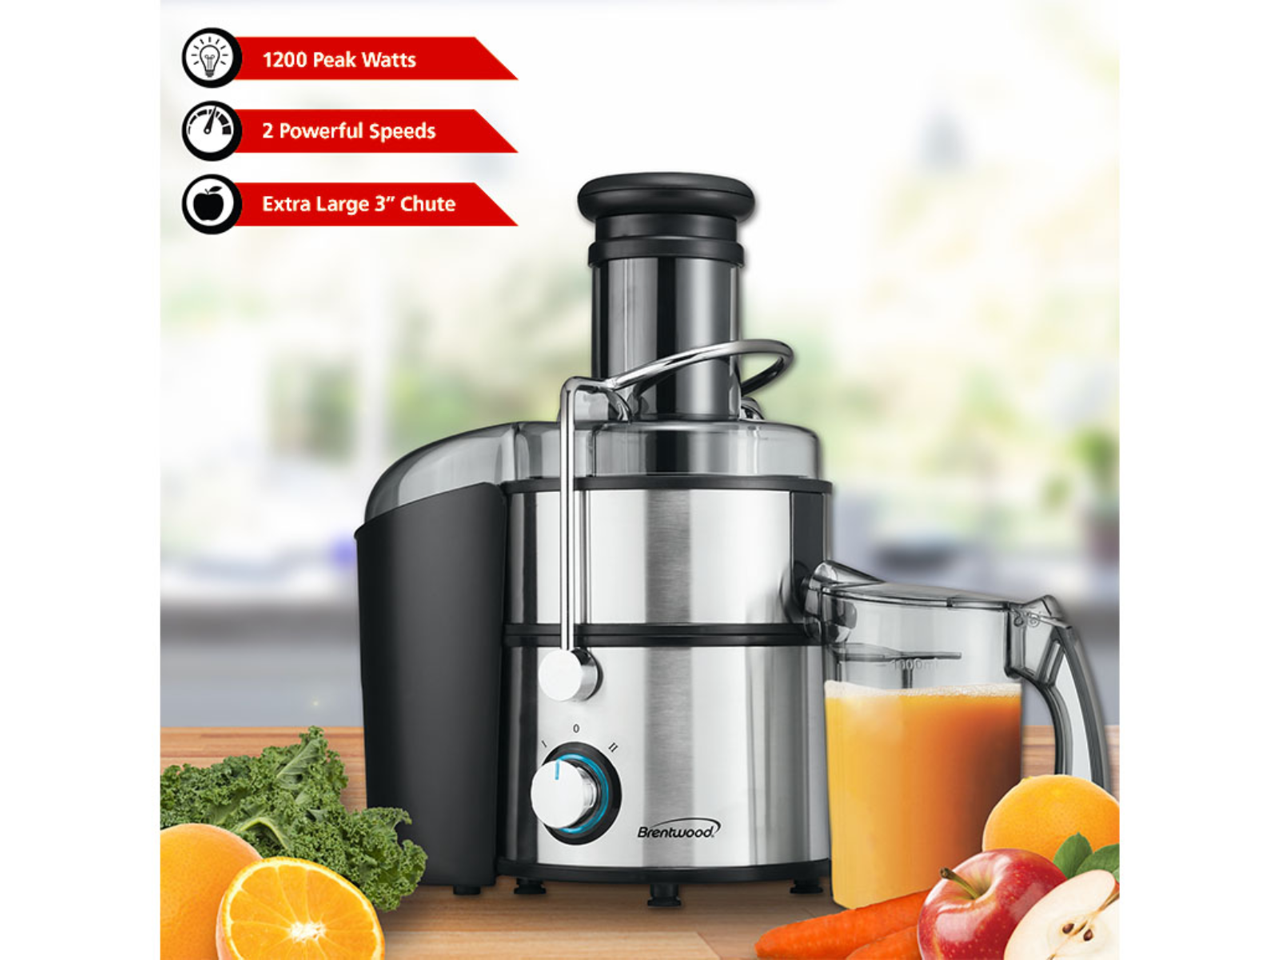 Brentwood Appliances JC-500 2-Speed 800Watt Juice Extractor with Graduated Jar, Stainless Steel - image 5 of 5